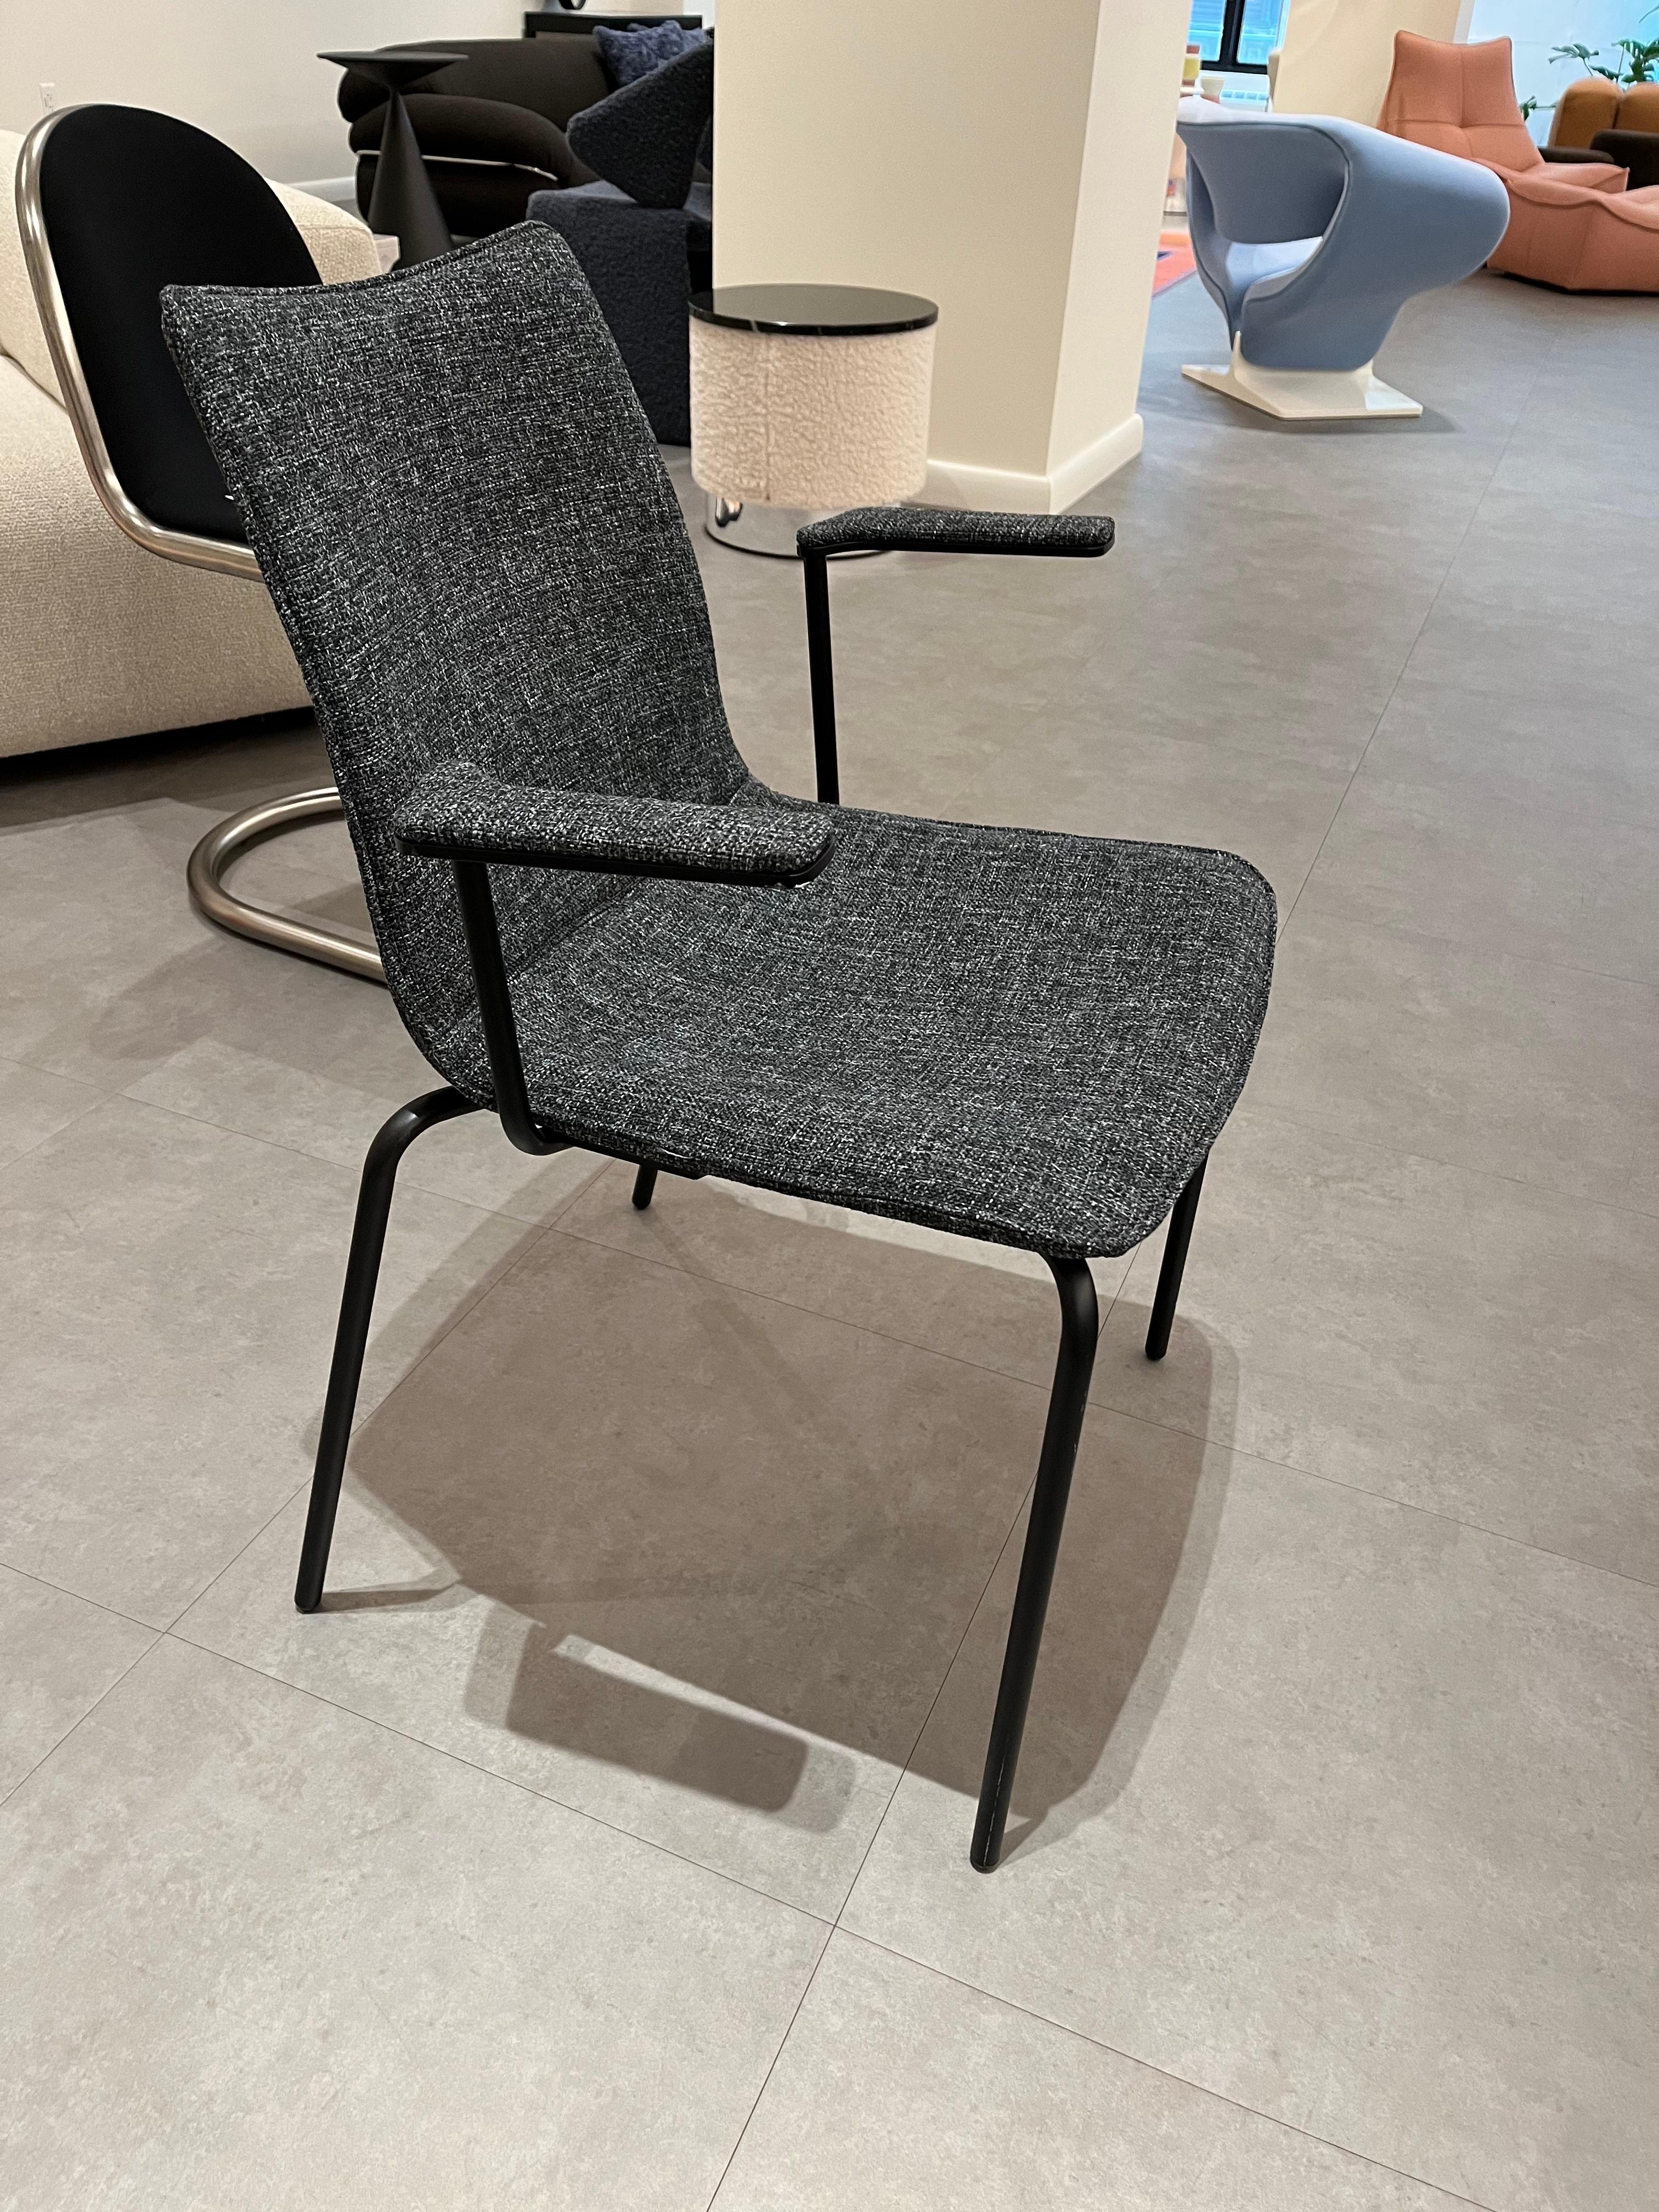 M2L Miss Chair in STOCK im Zustand „Gut“ im Angebot in New York, NY